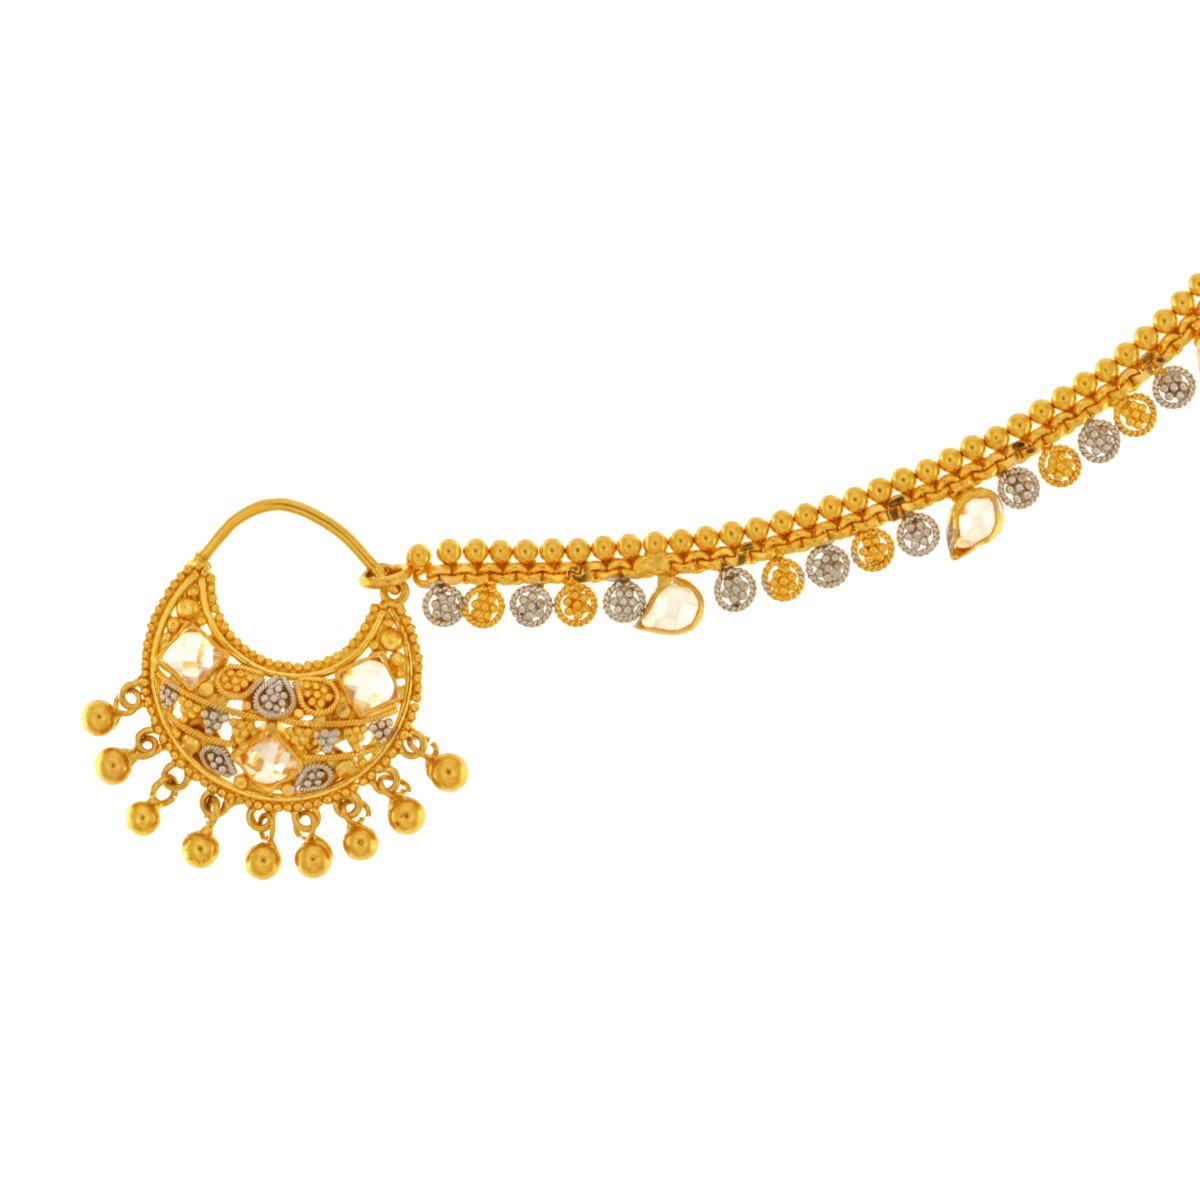 "The Elegance of 22ct Gold Jewelry: A Gleaming Tribute to Timeless Beauty"